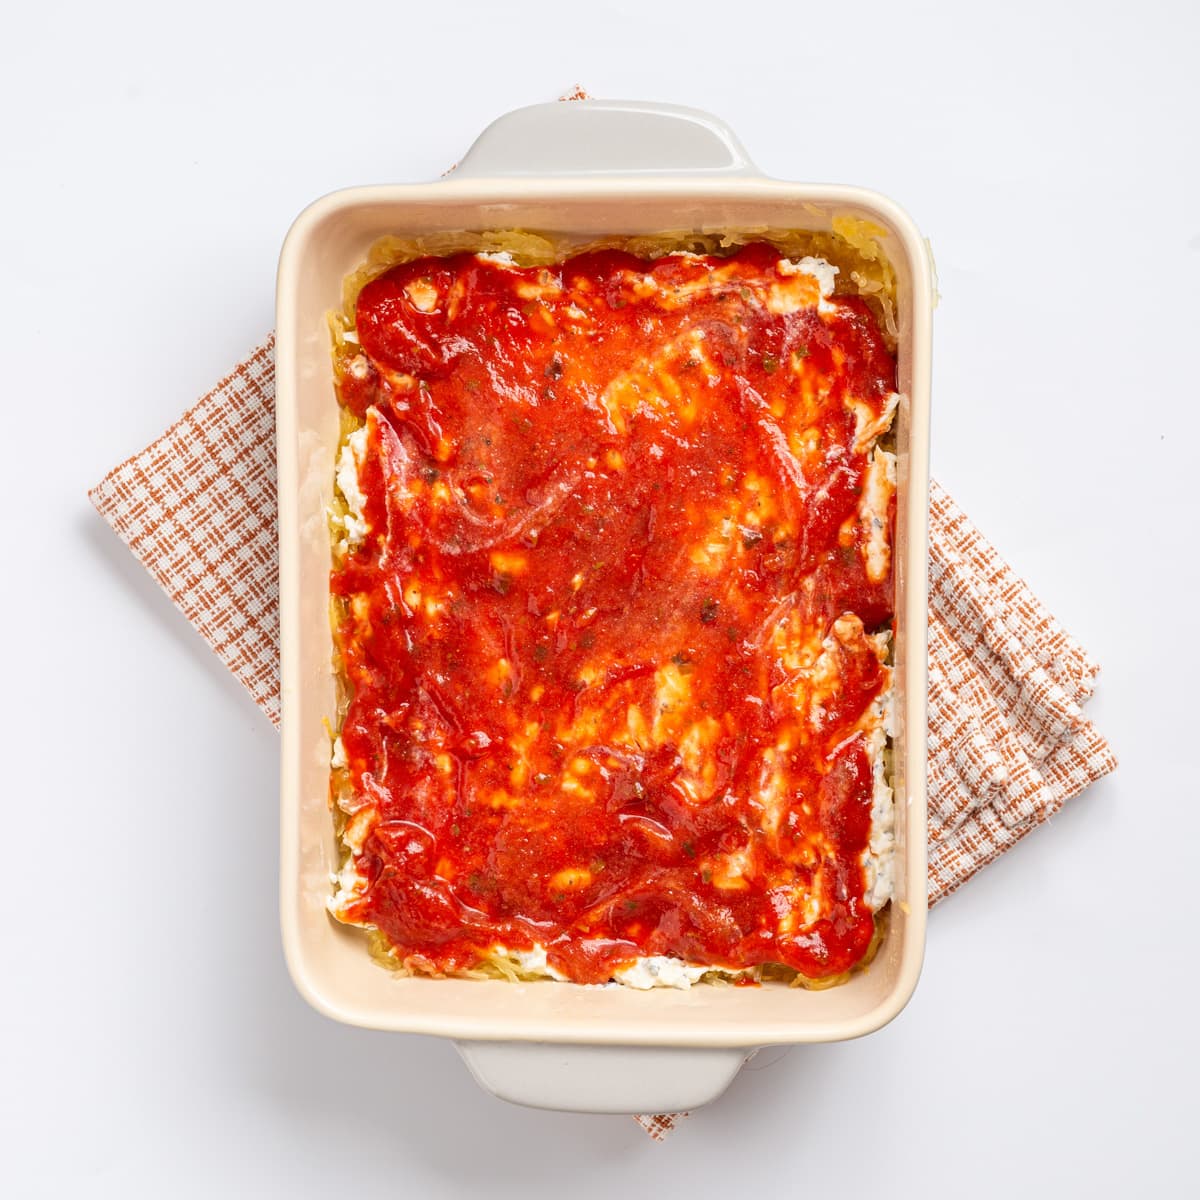 An image of a layer of marinara sauce spread on the baking sheet.